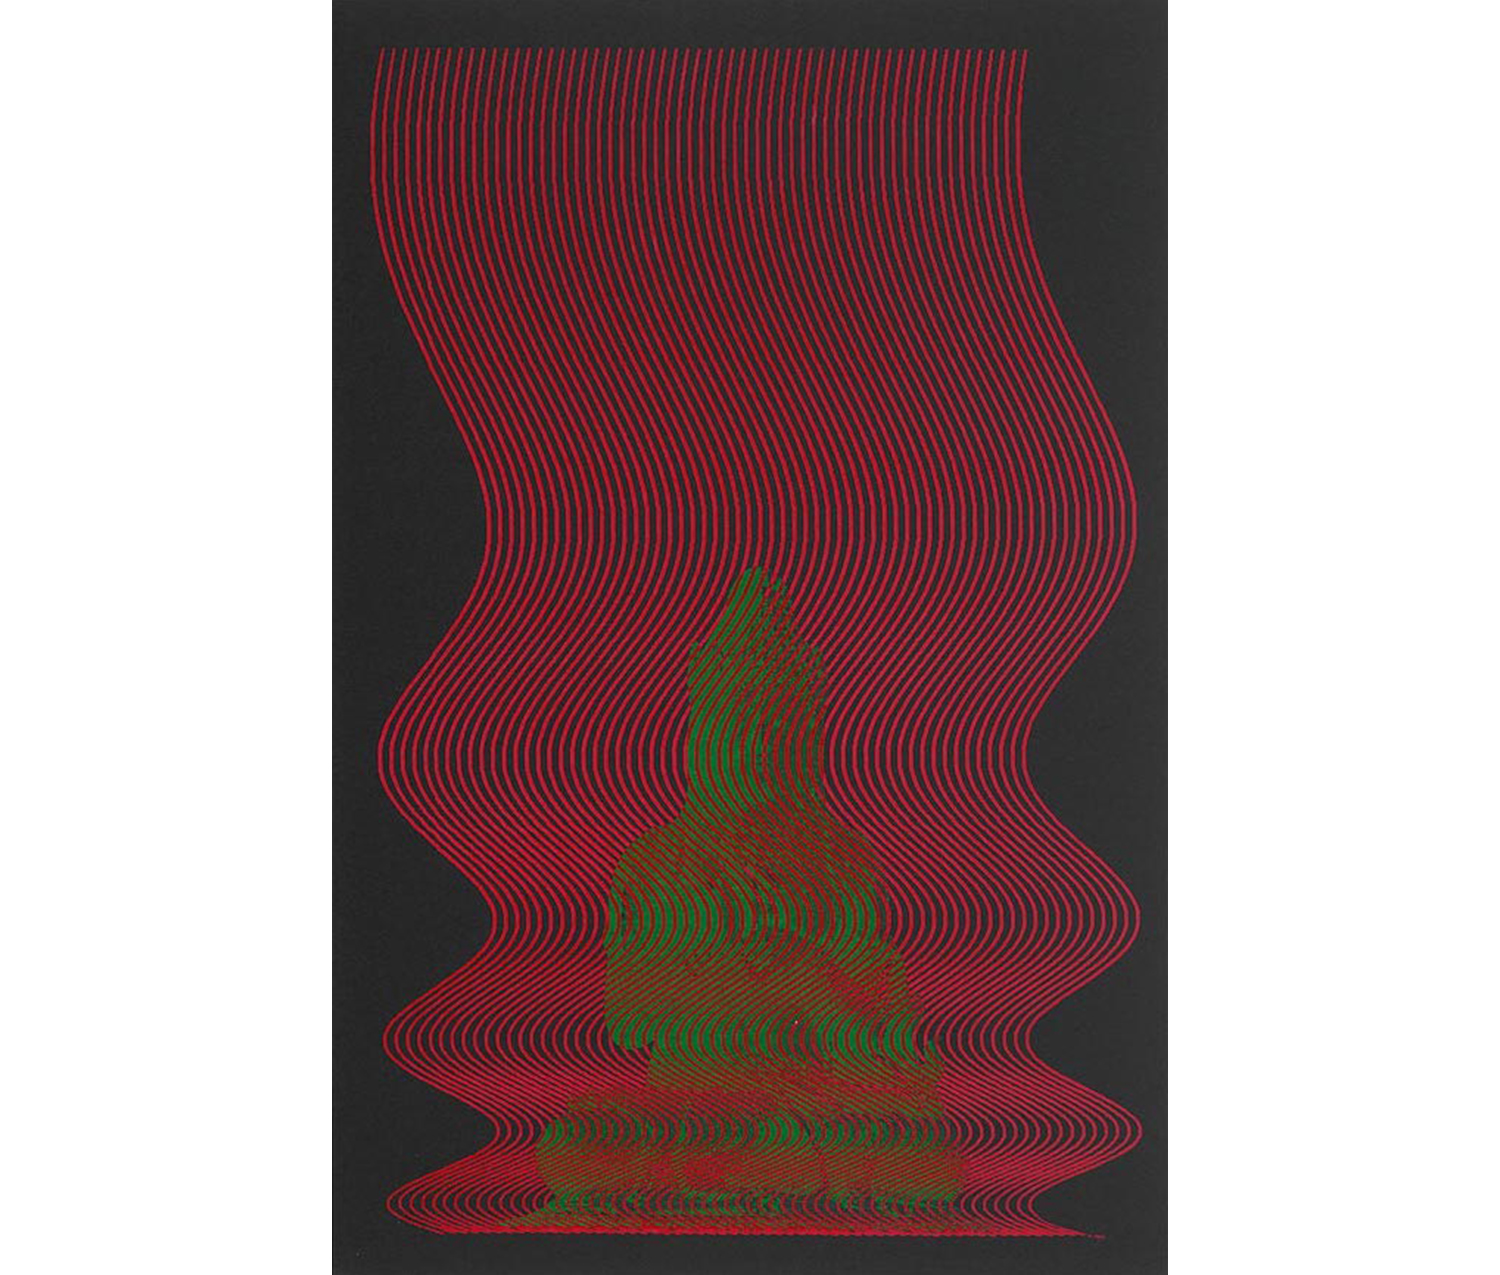 black ground with vertical red undulating lines like a stylized waterfall through which a green seated Buddha can be seen